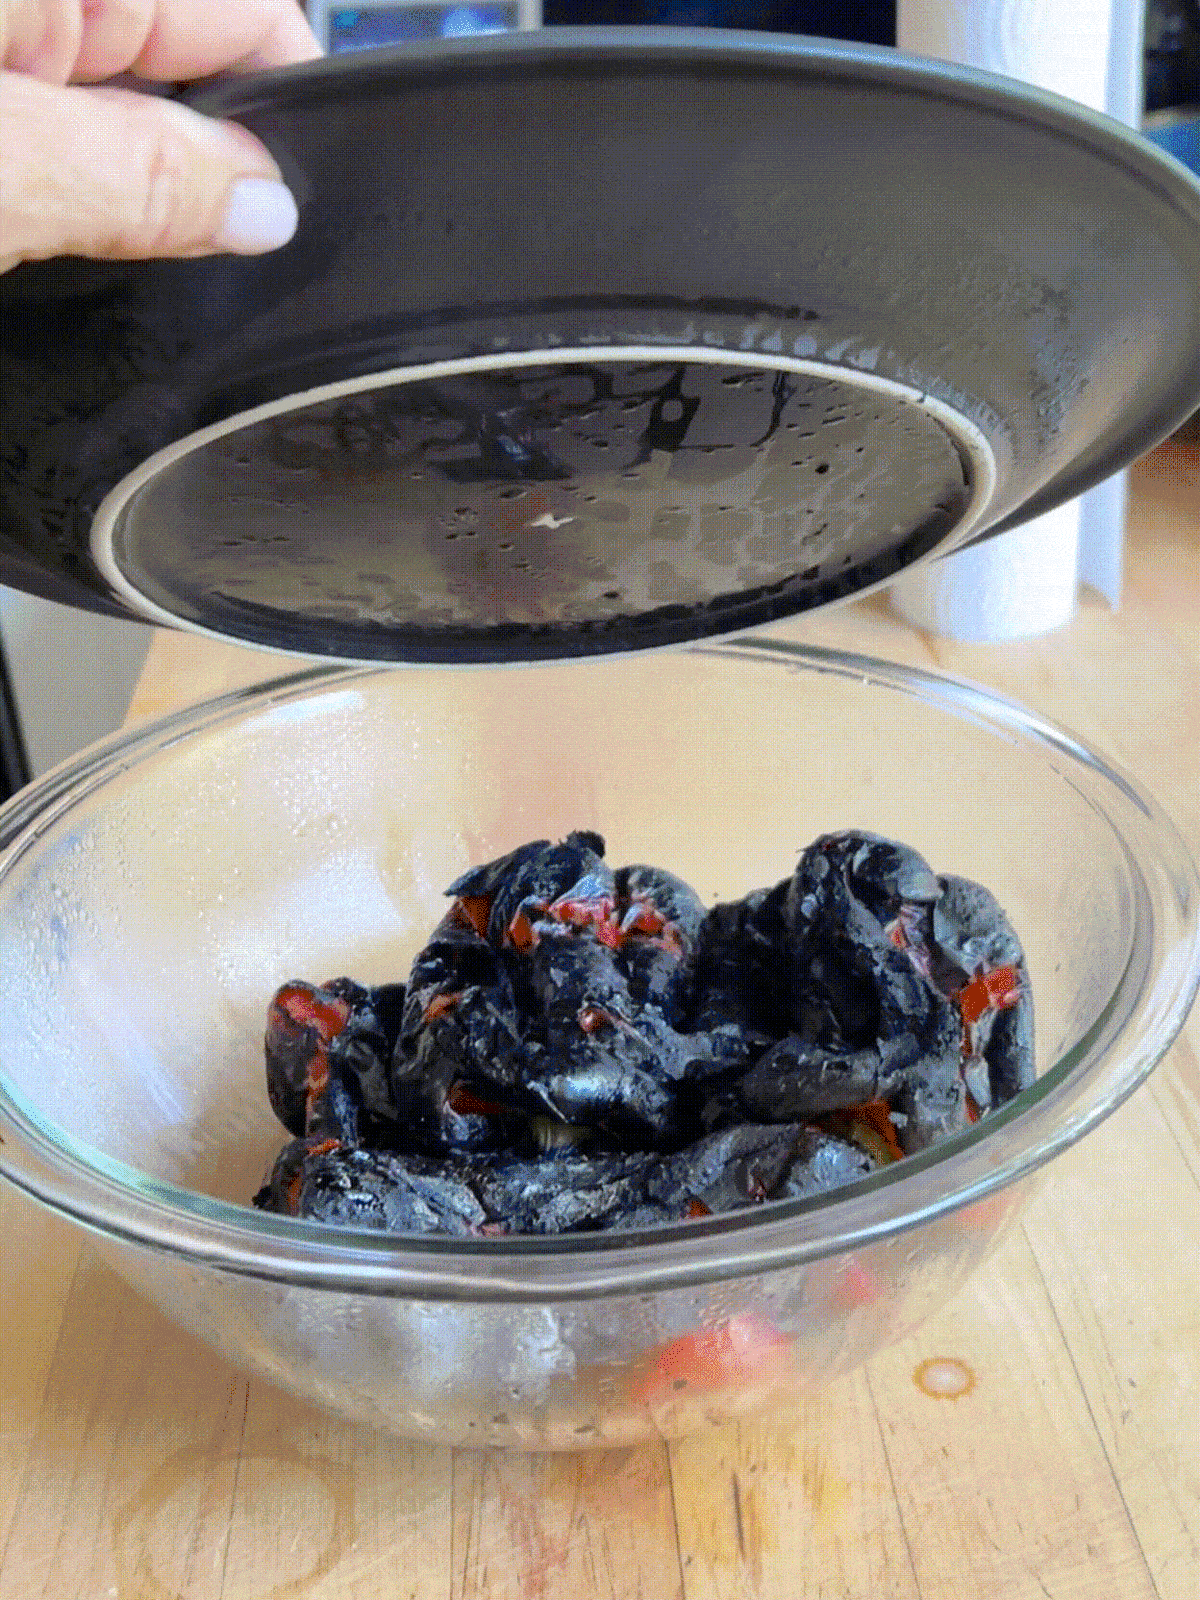 Steam rising from bowl full of charred red peppers.